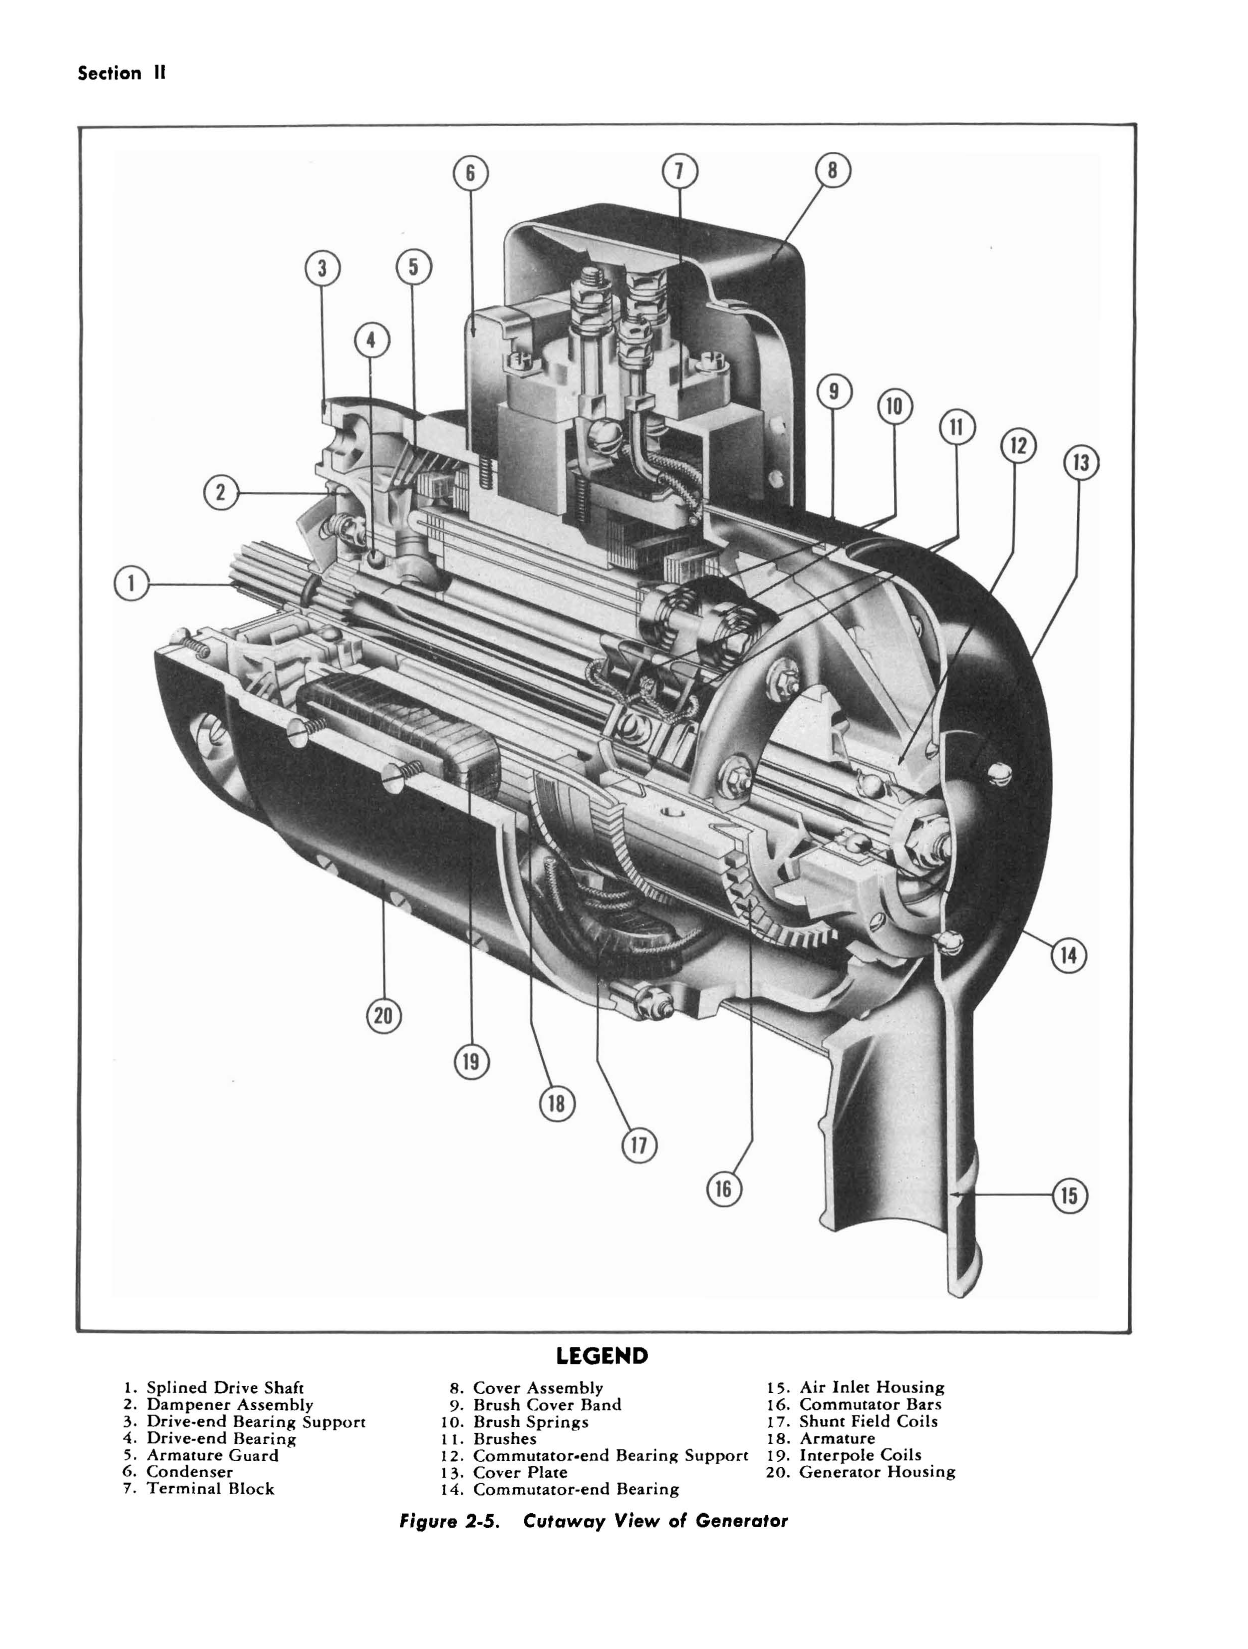 Sample page 9 from AirCorps Library document: Instructions with Parts Catalog for Jack & Heintz Generator - Model G26